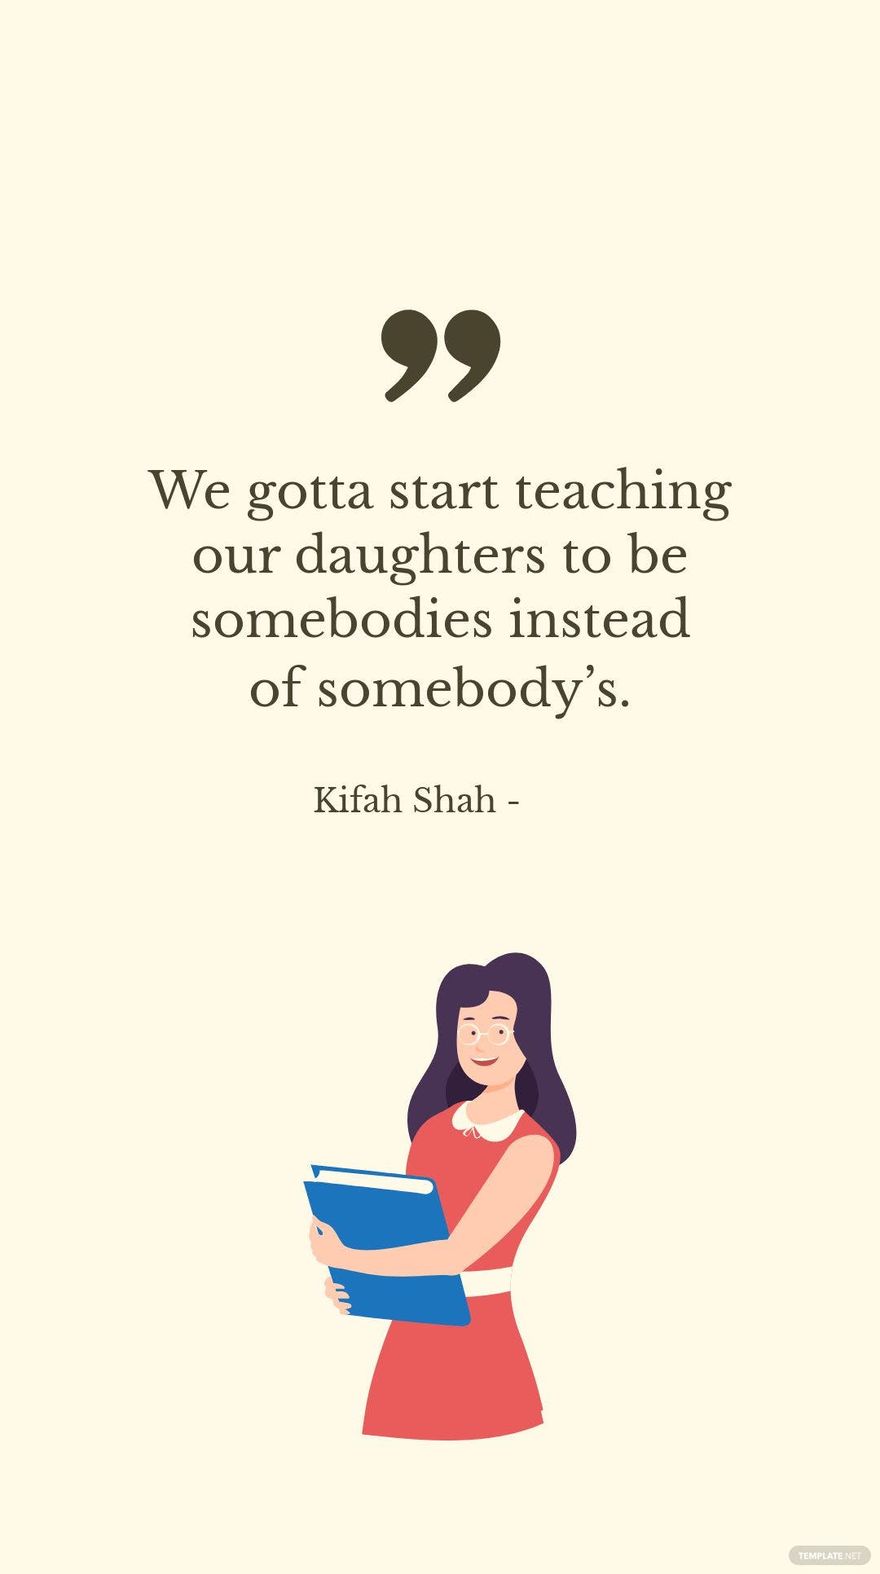 Free KIFAH SHAH - We gotta start teaching our daughters to be somebodies instead of somebody’s.